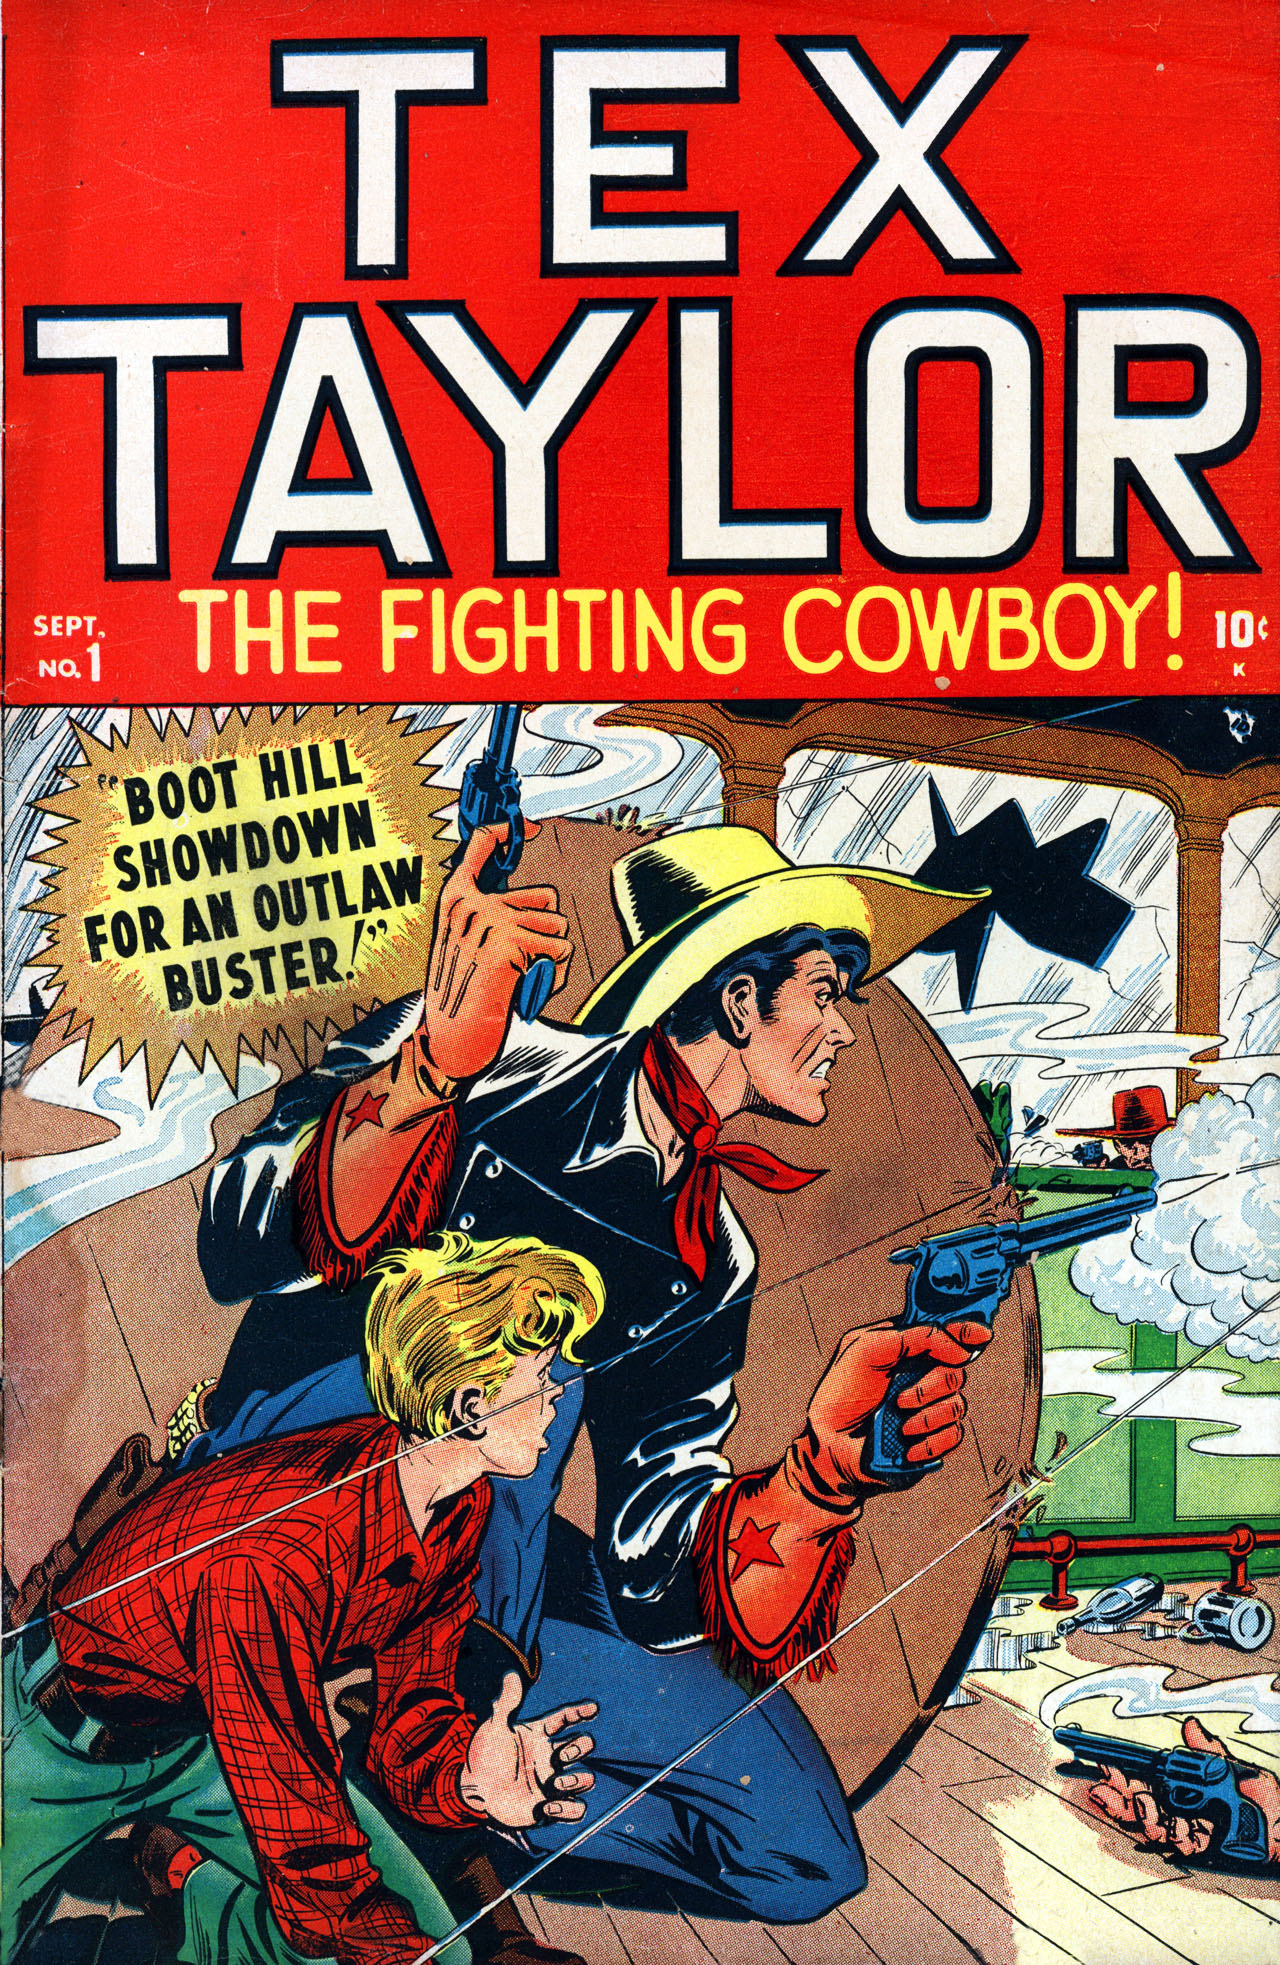 Read online Tex Taylor comic -  Issue #1 - 1